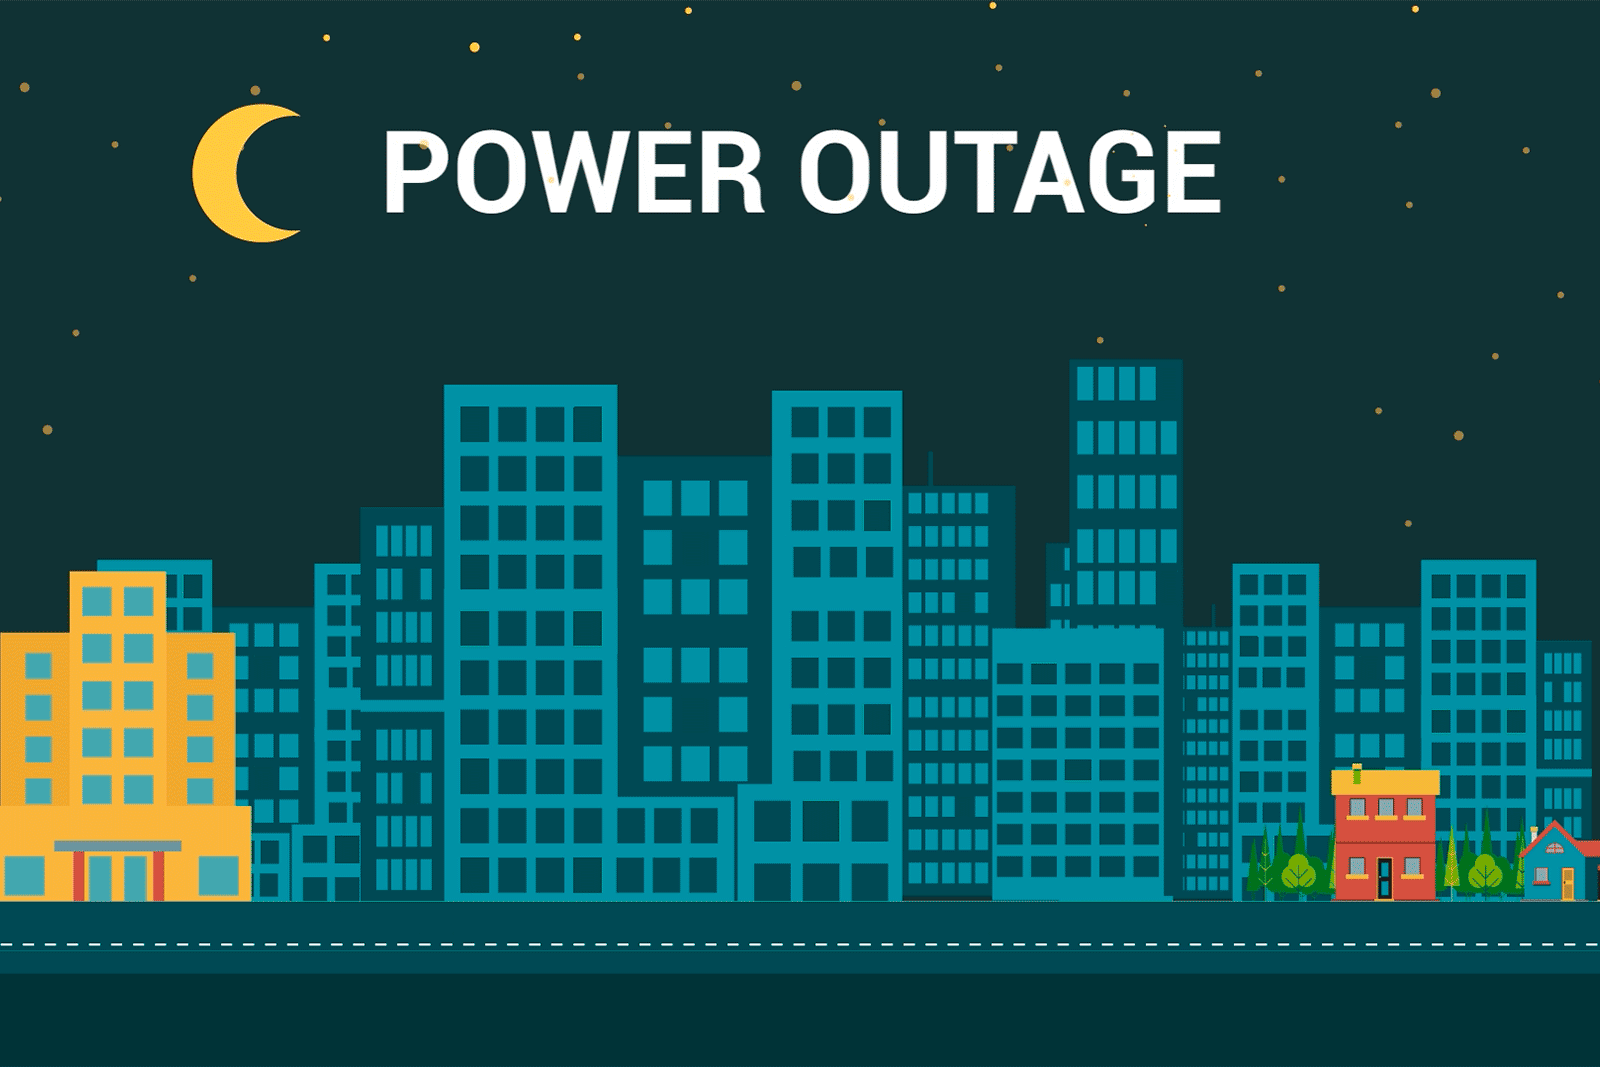 1000+ power outage news from Canada